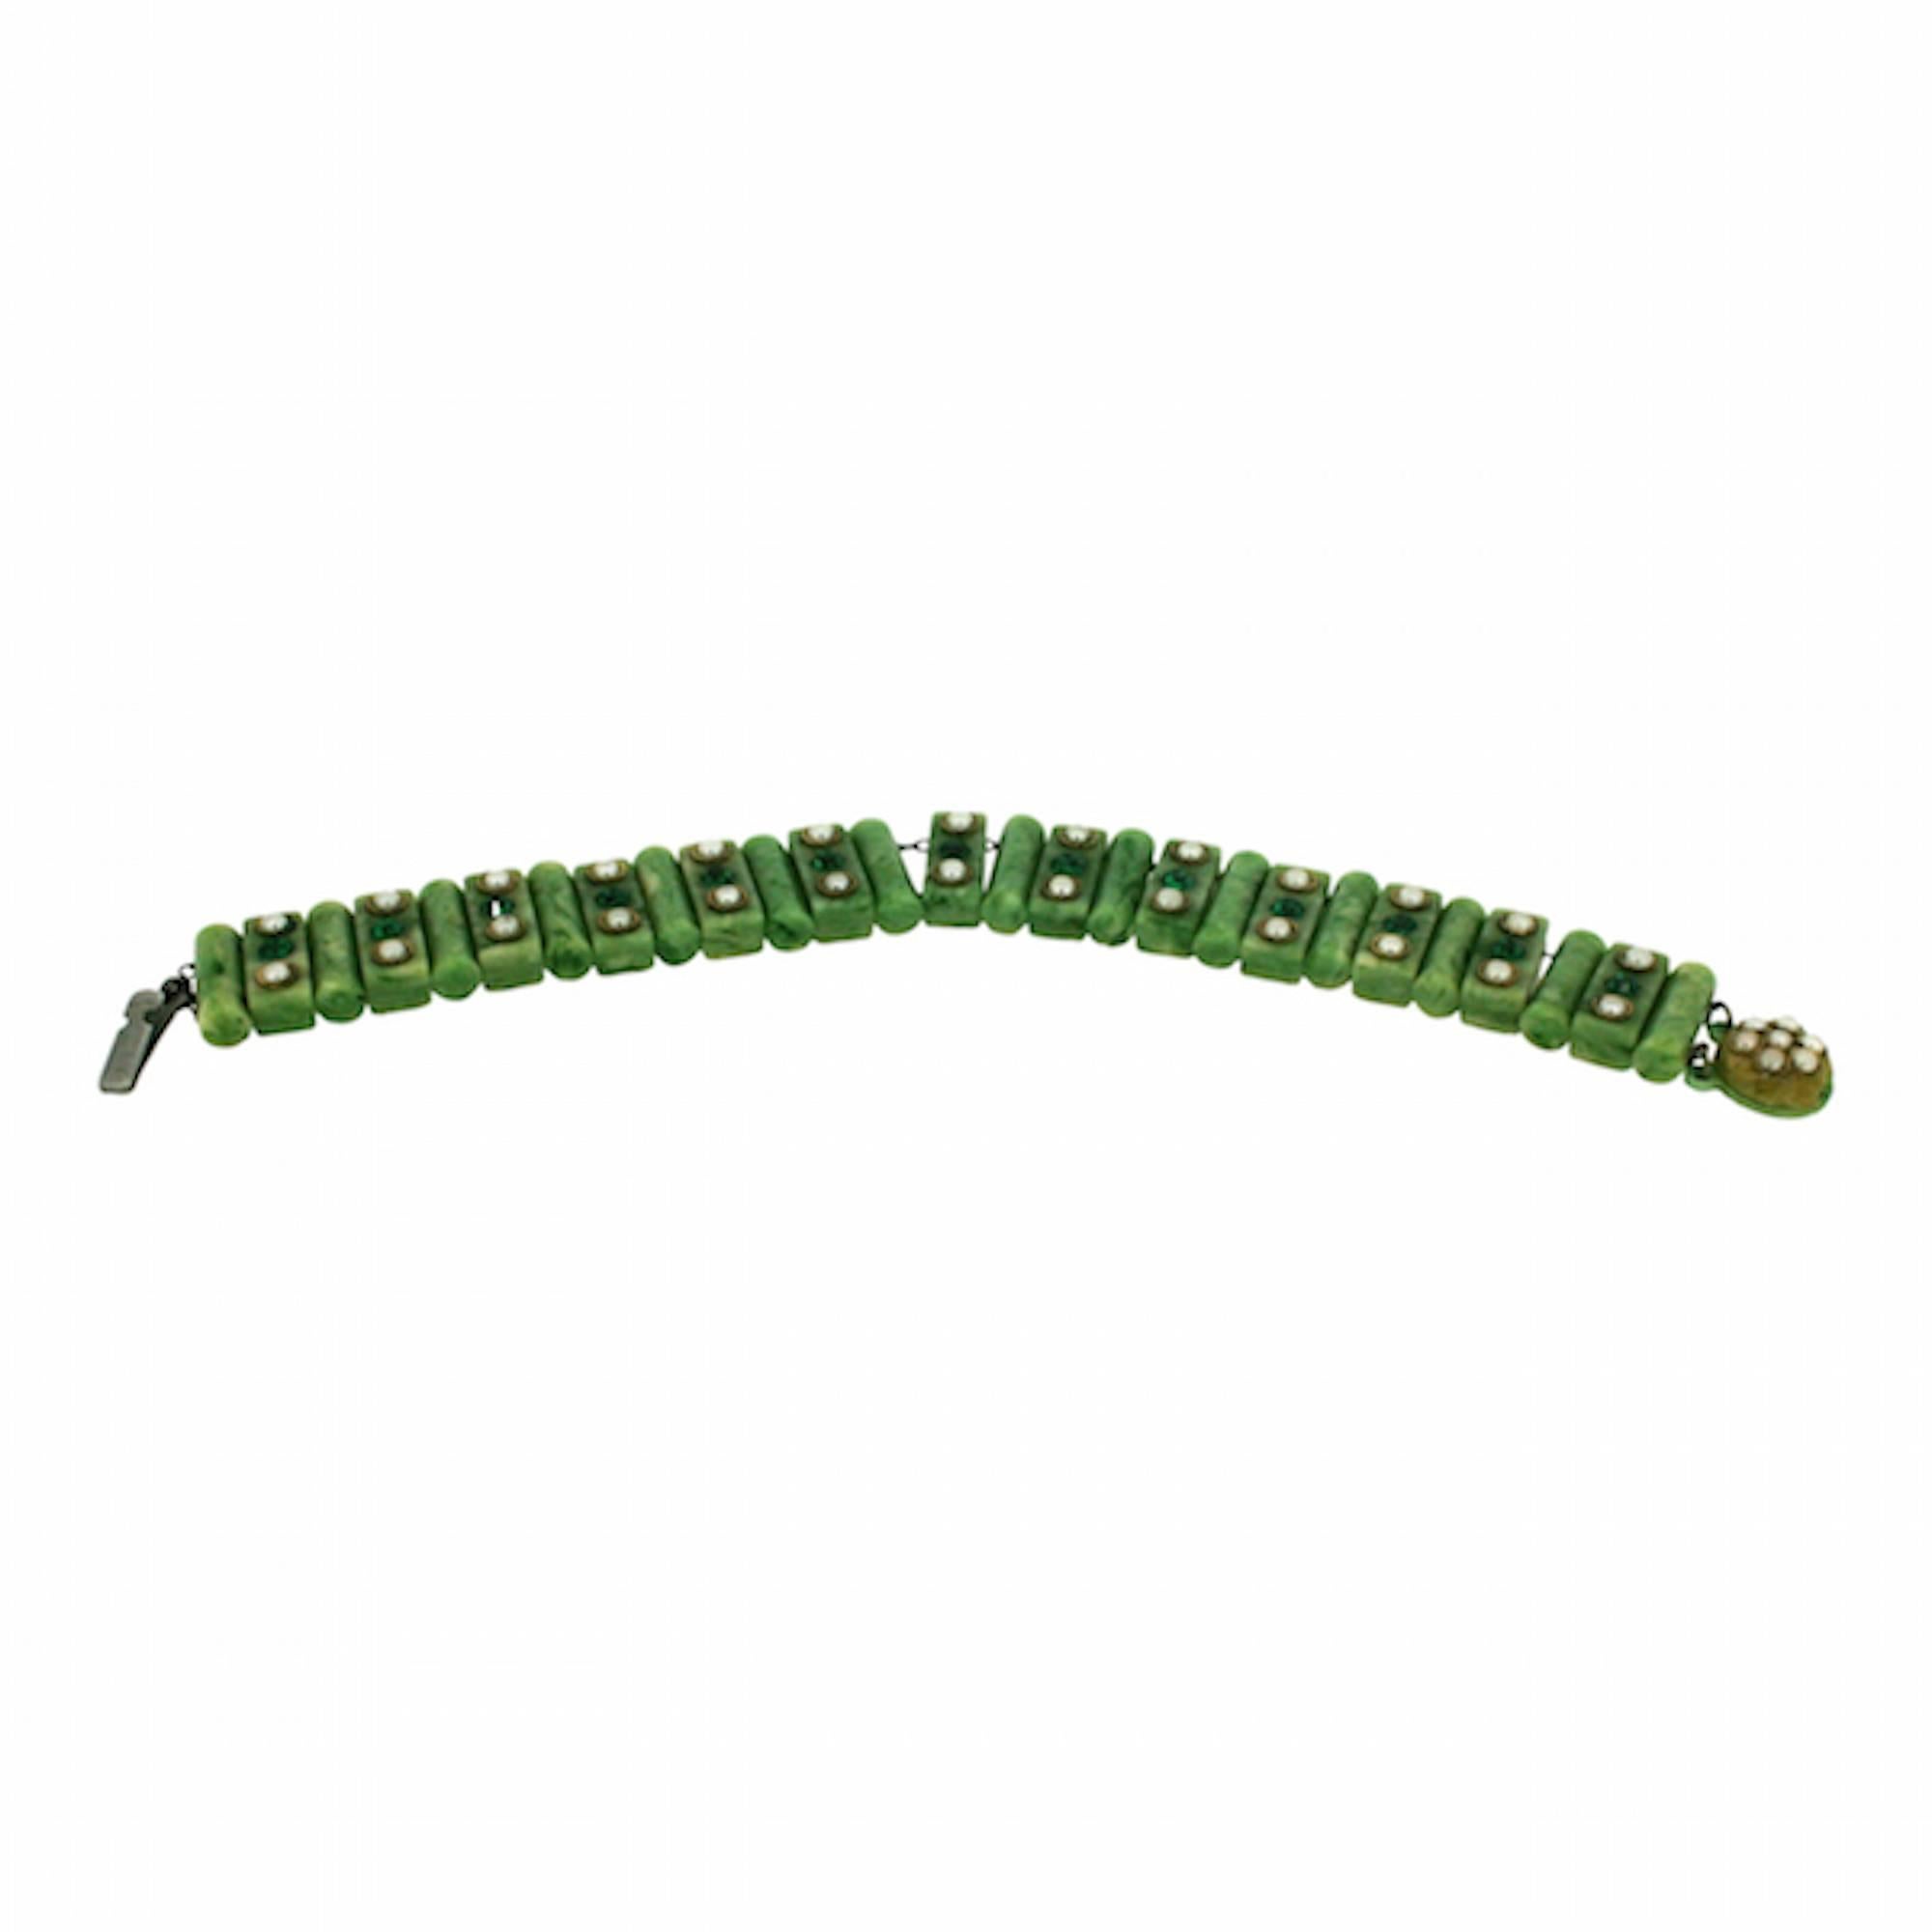 Evocative and unusual, this bracelet dates from the 1930s and is unsigned.

Condition Report:
Excellent

The Details...
This bracelet is made up of green celluloid cylinders and cuboids linked together on a gilt metal chain. Each cuboid is detailed